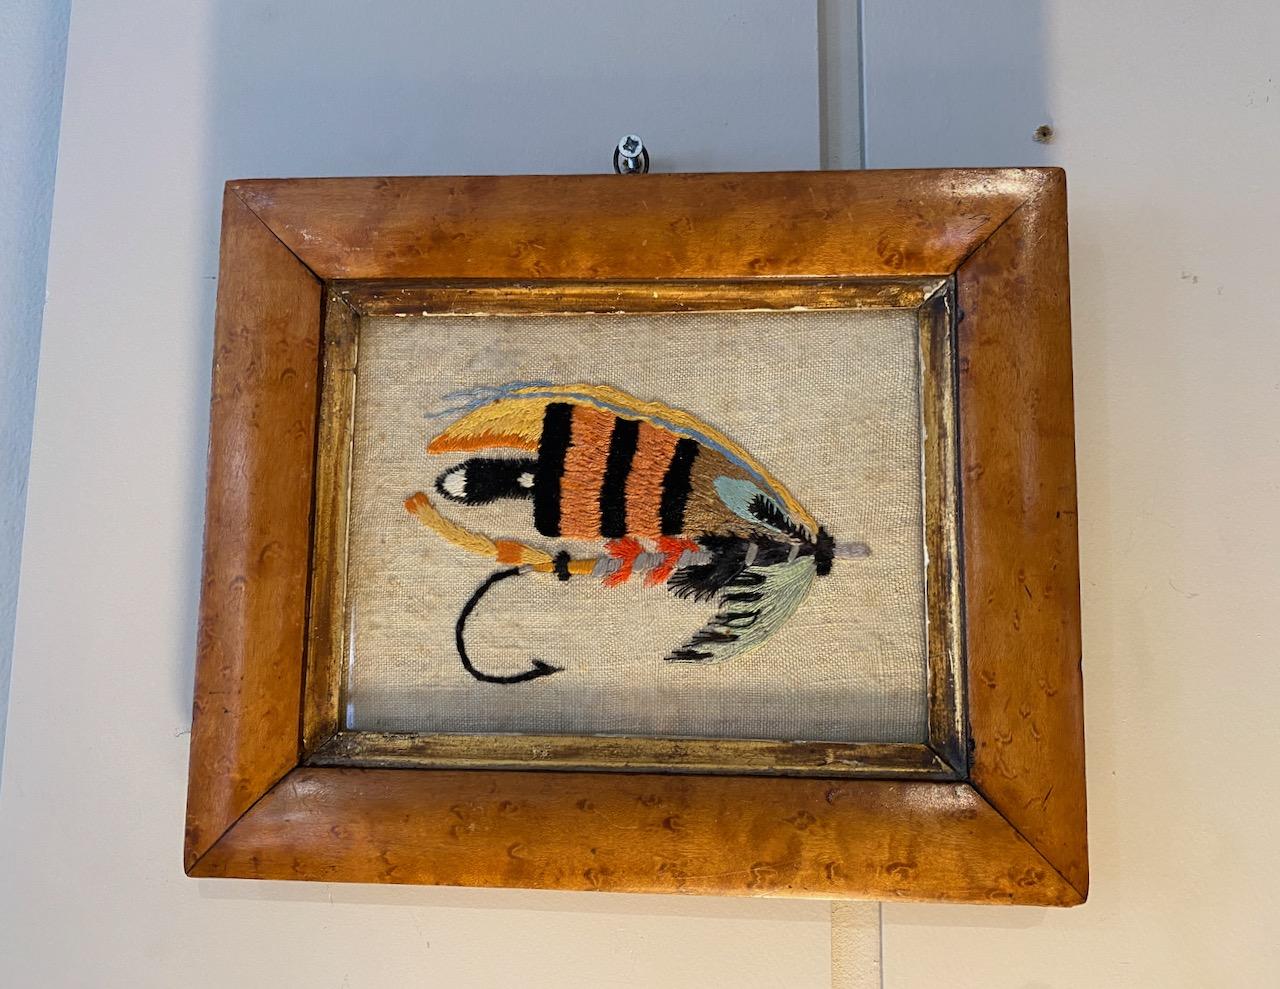 Needlework of a Fishing Fly